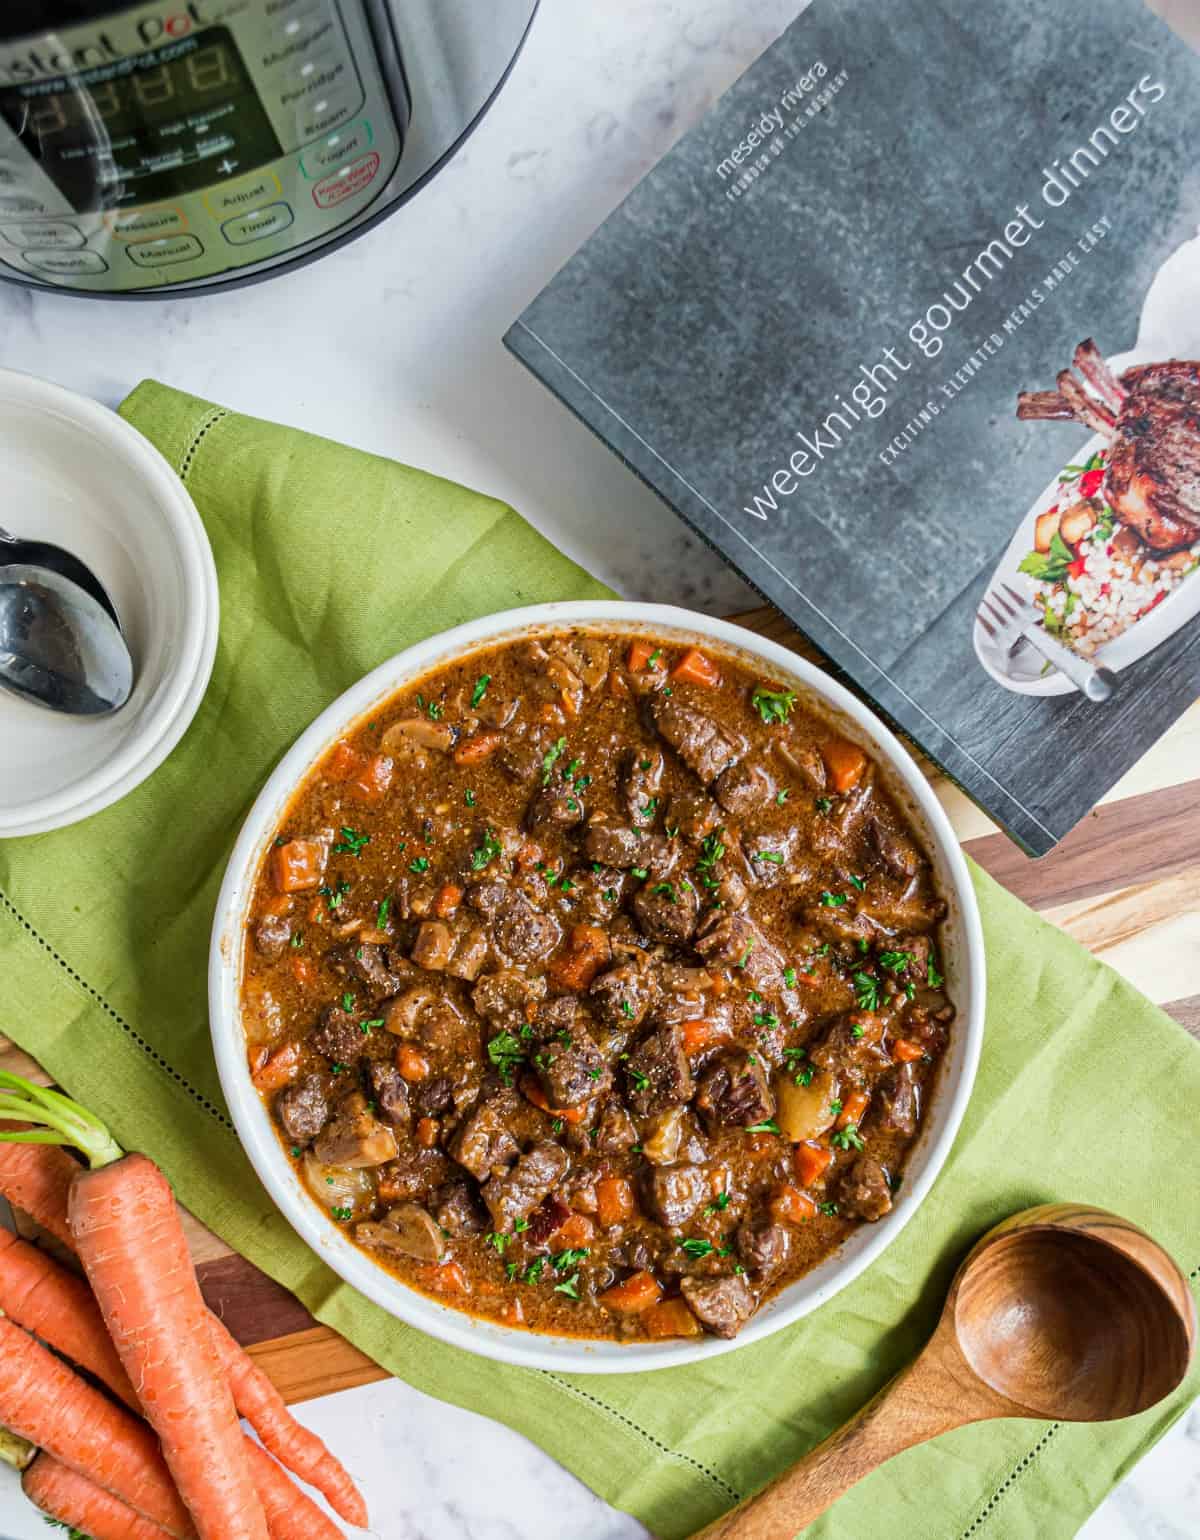 Beef stew in a serving bowl.